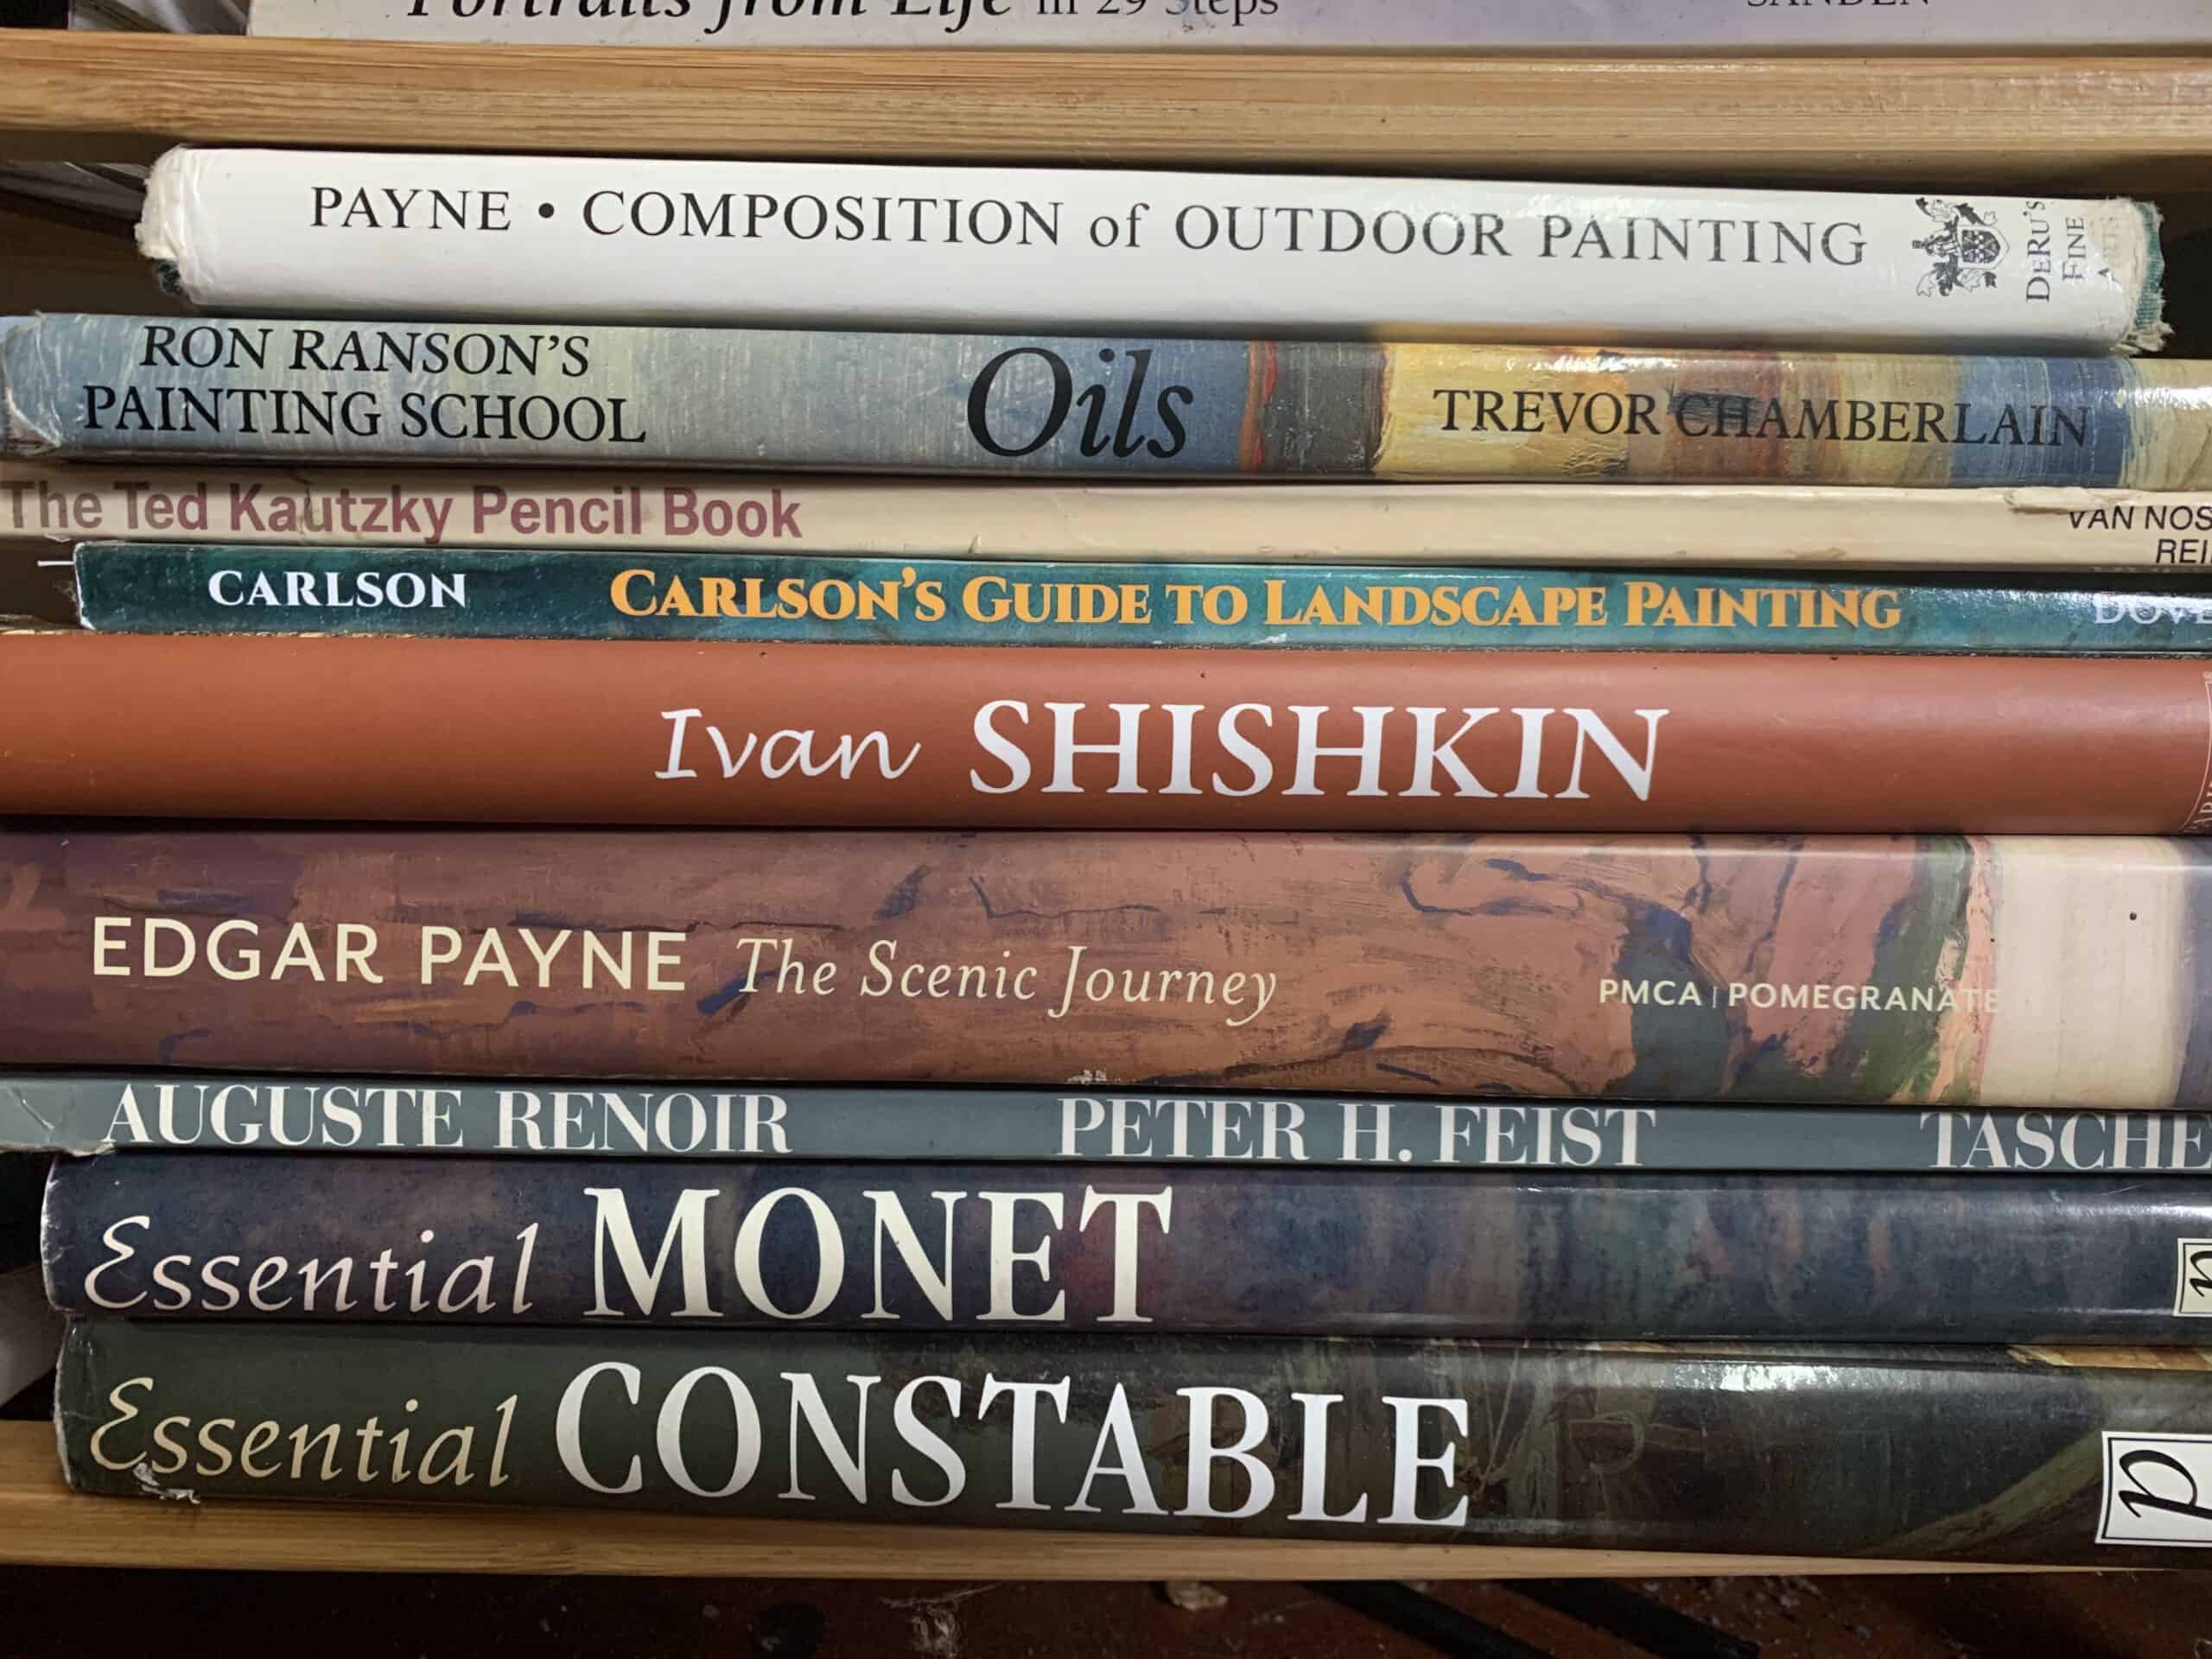 20 Best Oil Painting Books of All Time - BookAuthority